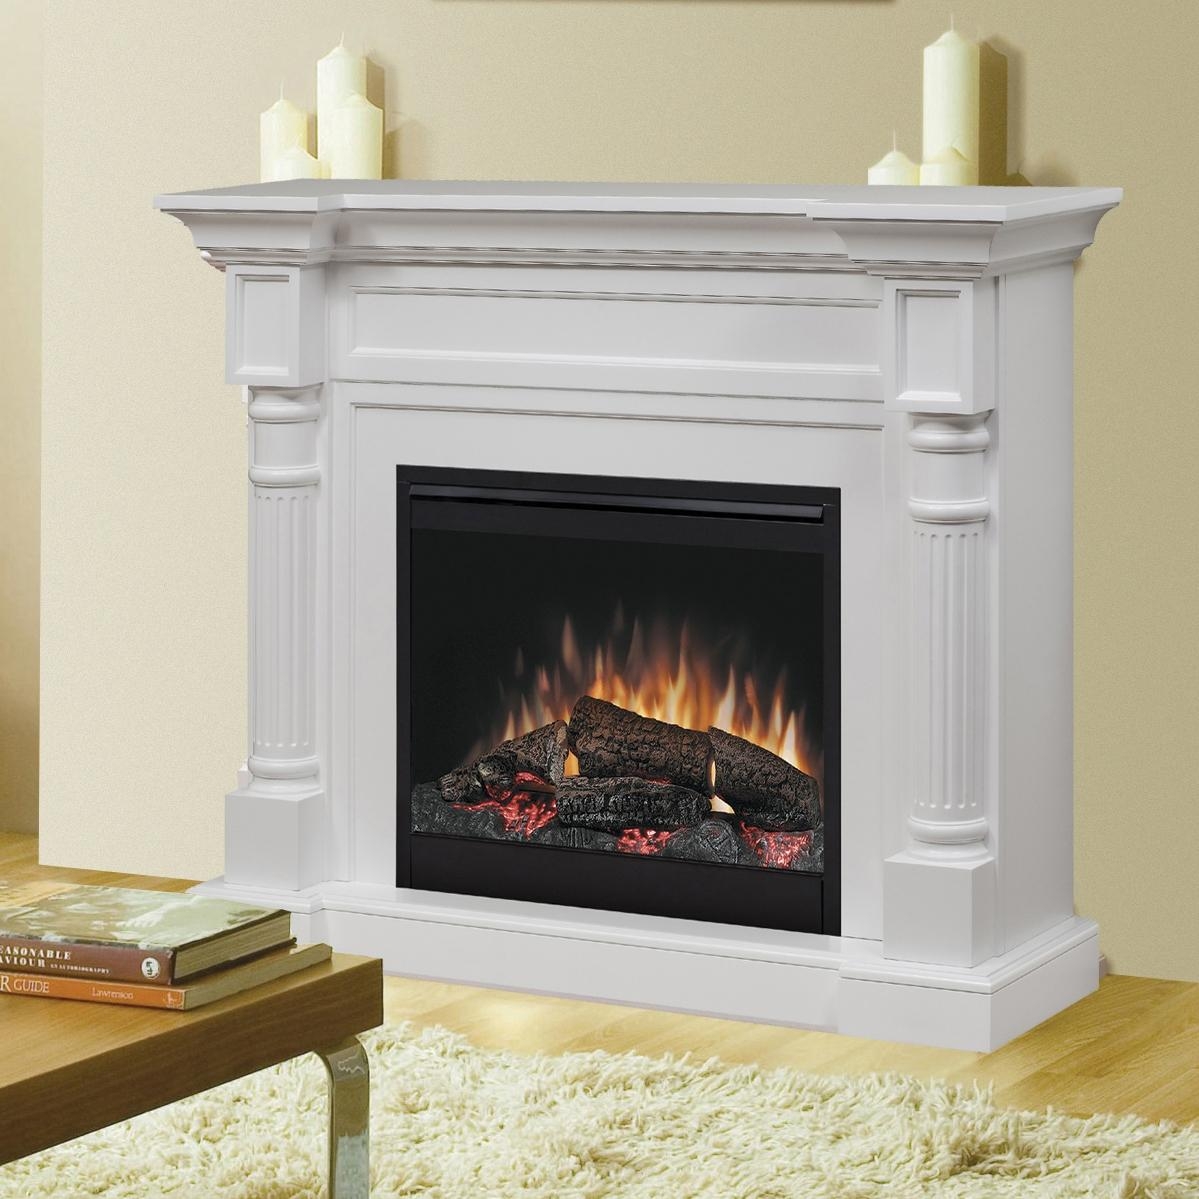 Monessen Fireplace Parts Unique 62 Electric Fireplace Charming Fireplace